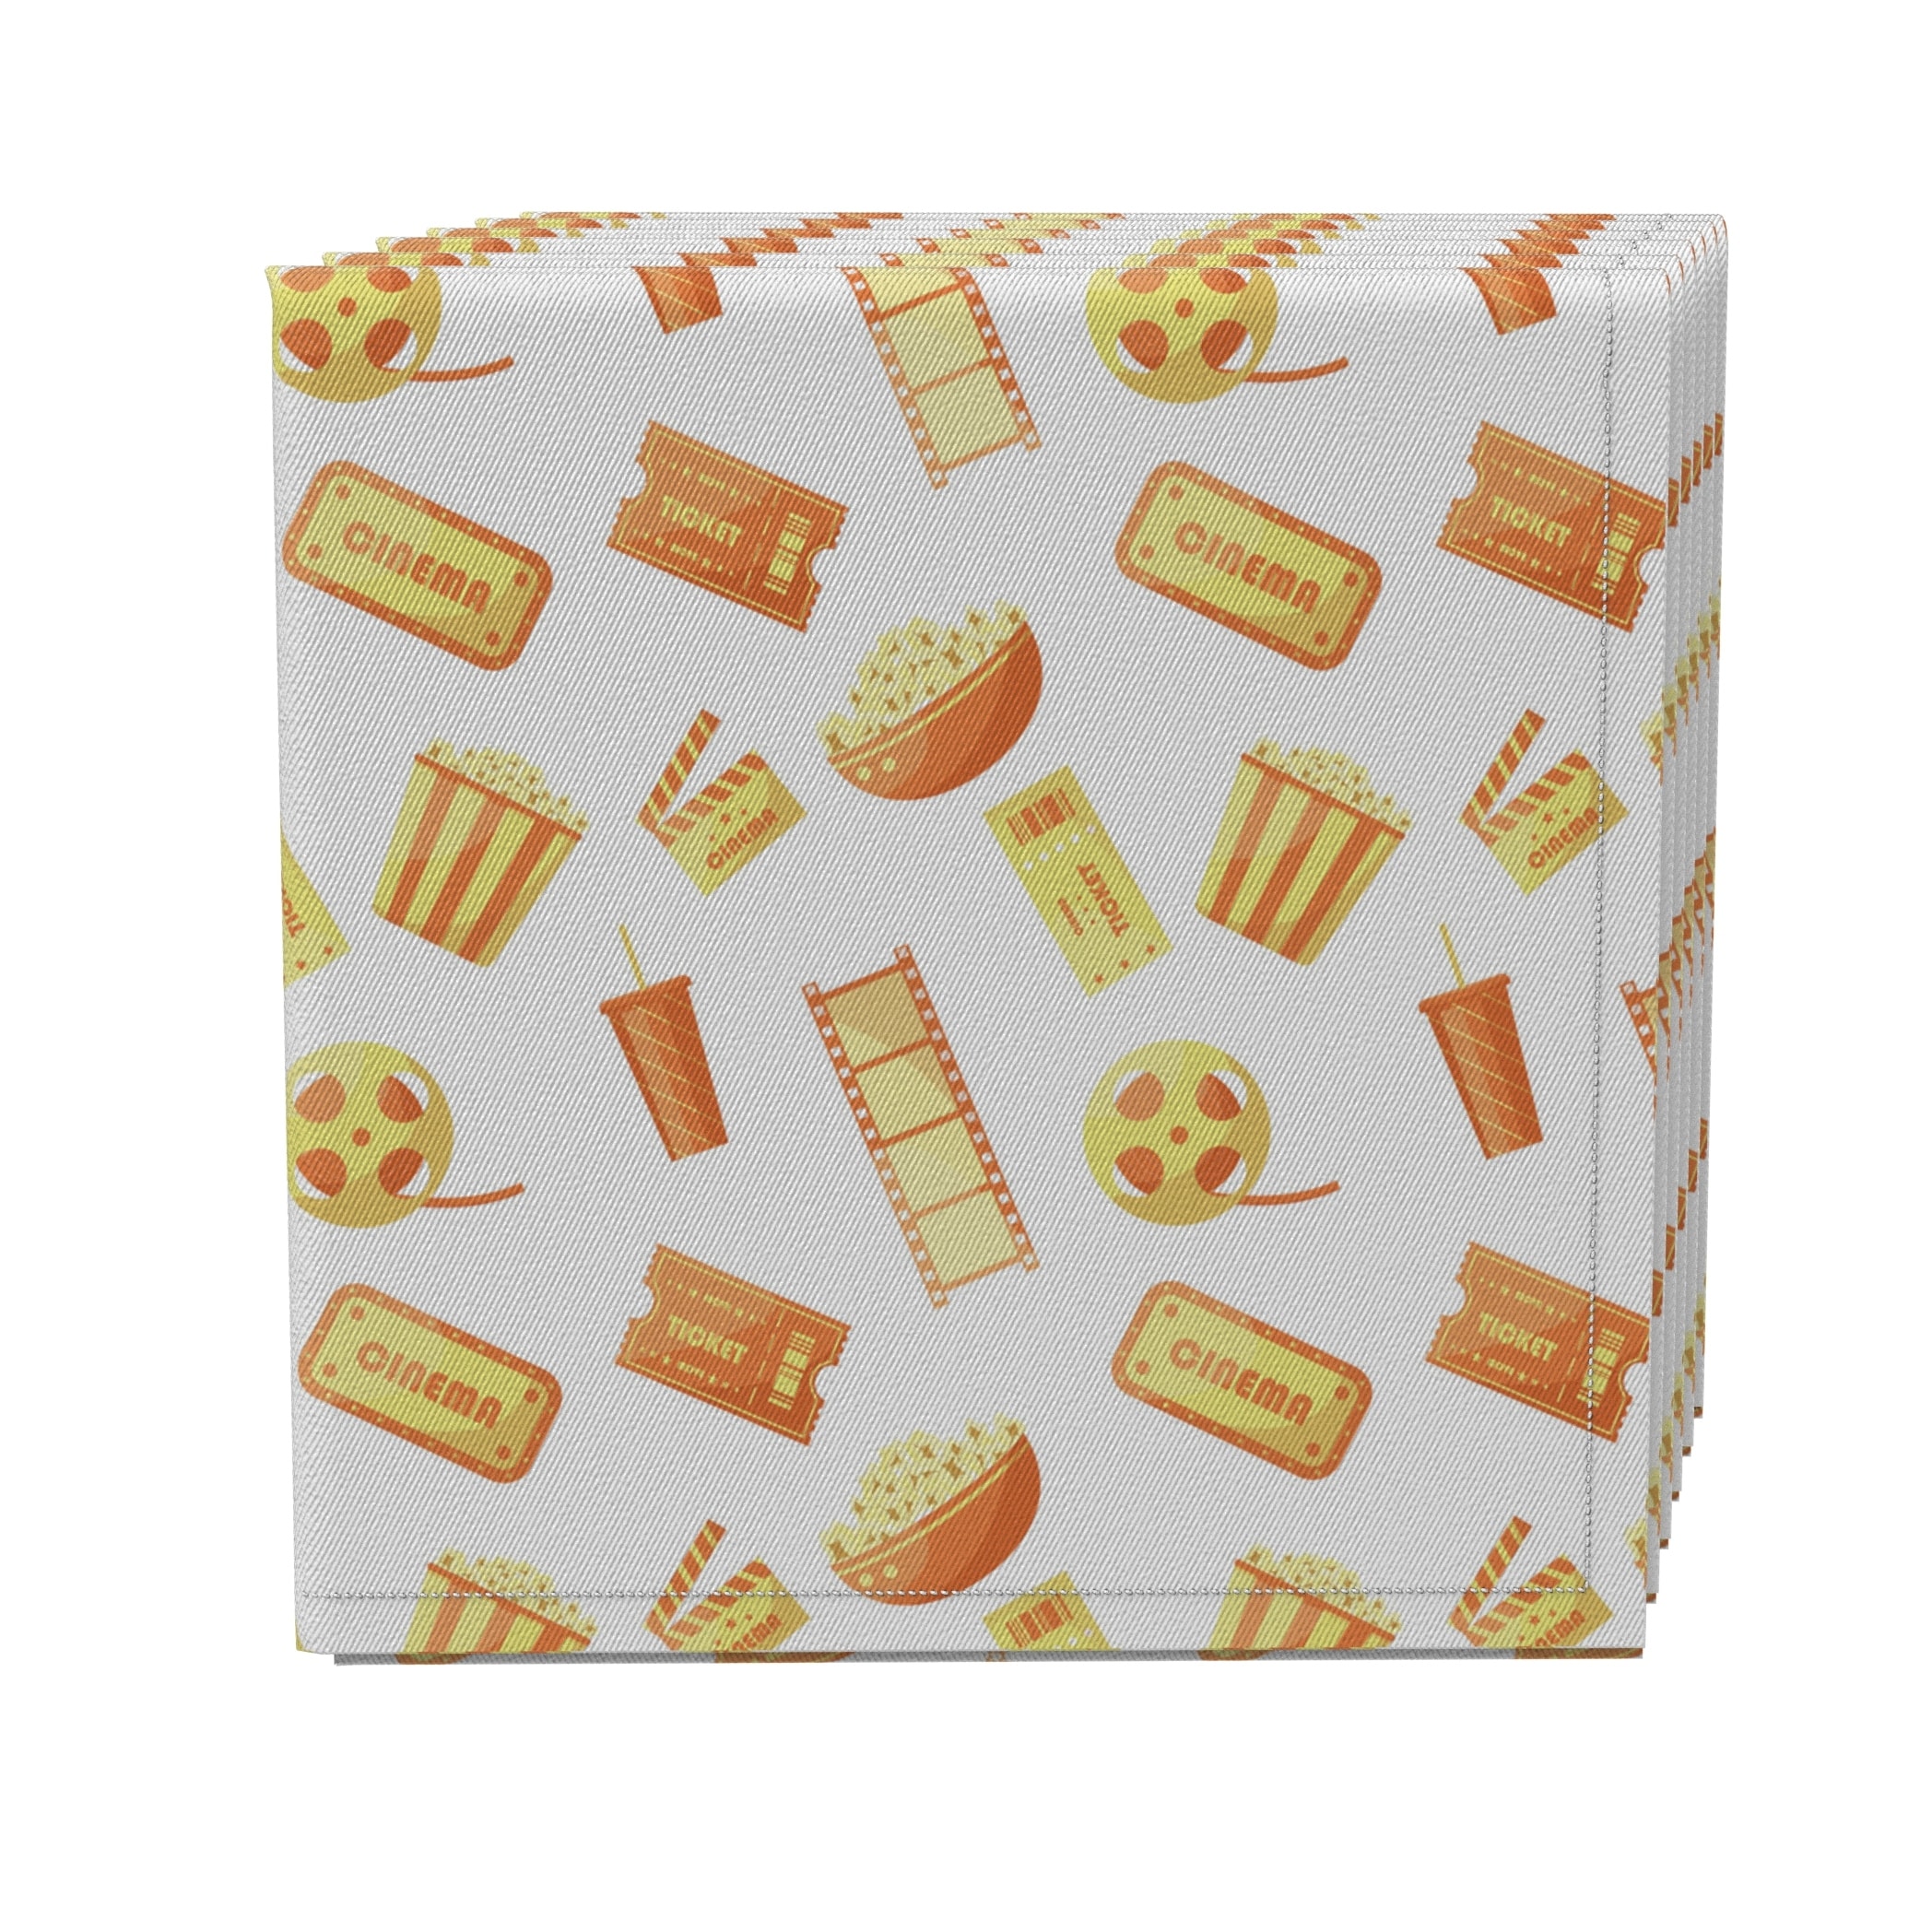 Fabric Textile Products, Inc. Napkin Set of 4, 100% Cotton, 20x20", Time at the Cinema - 20 x 20